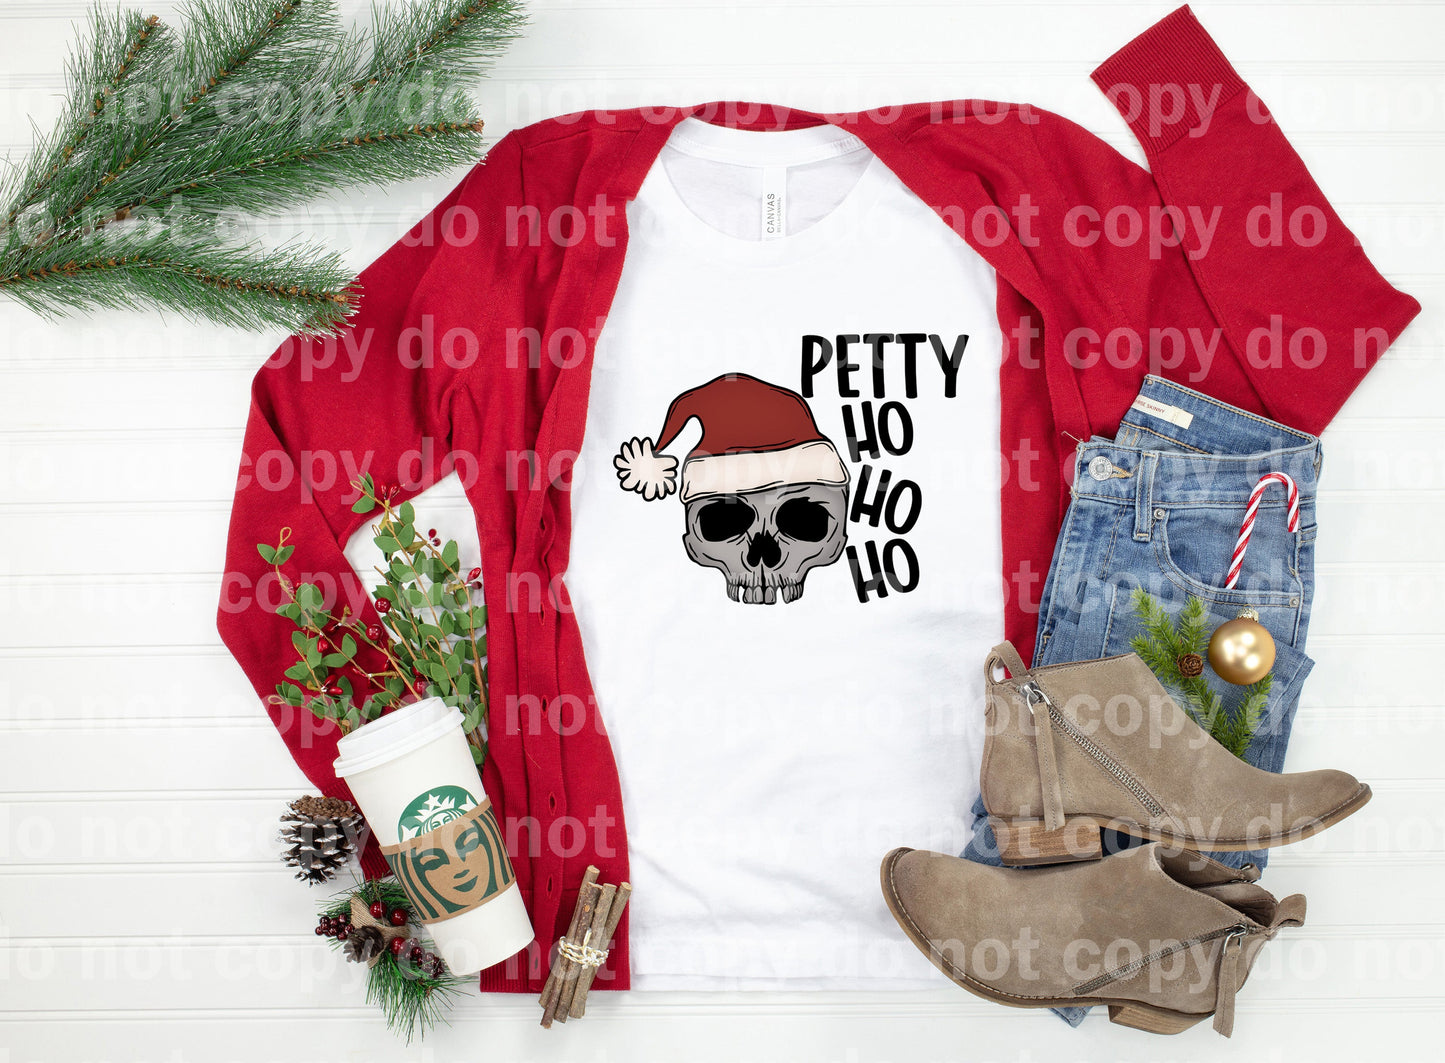 Petty Hohoho Full Color/One Color Dream Print or Sublimation Print